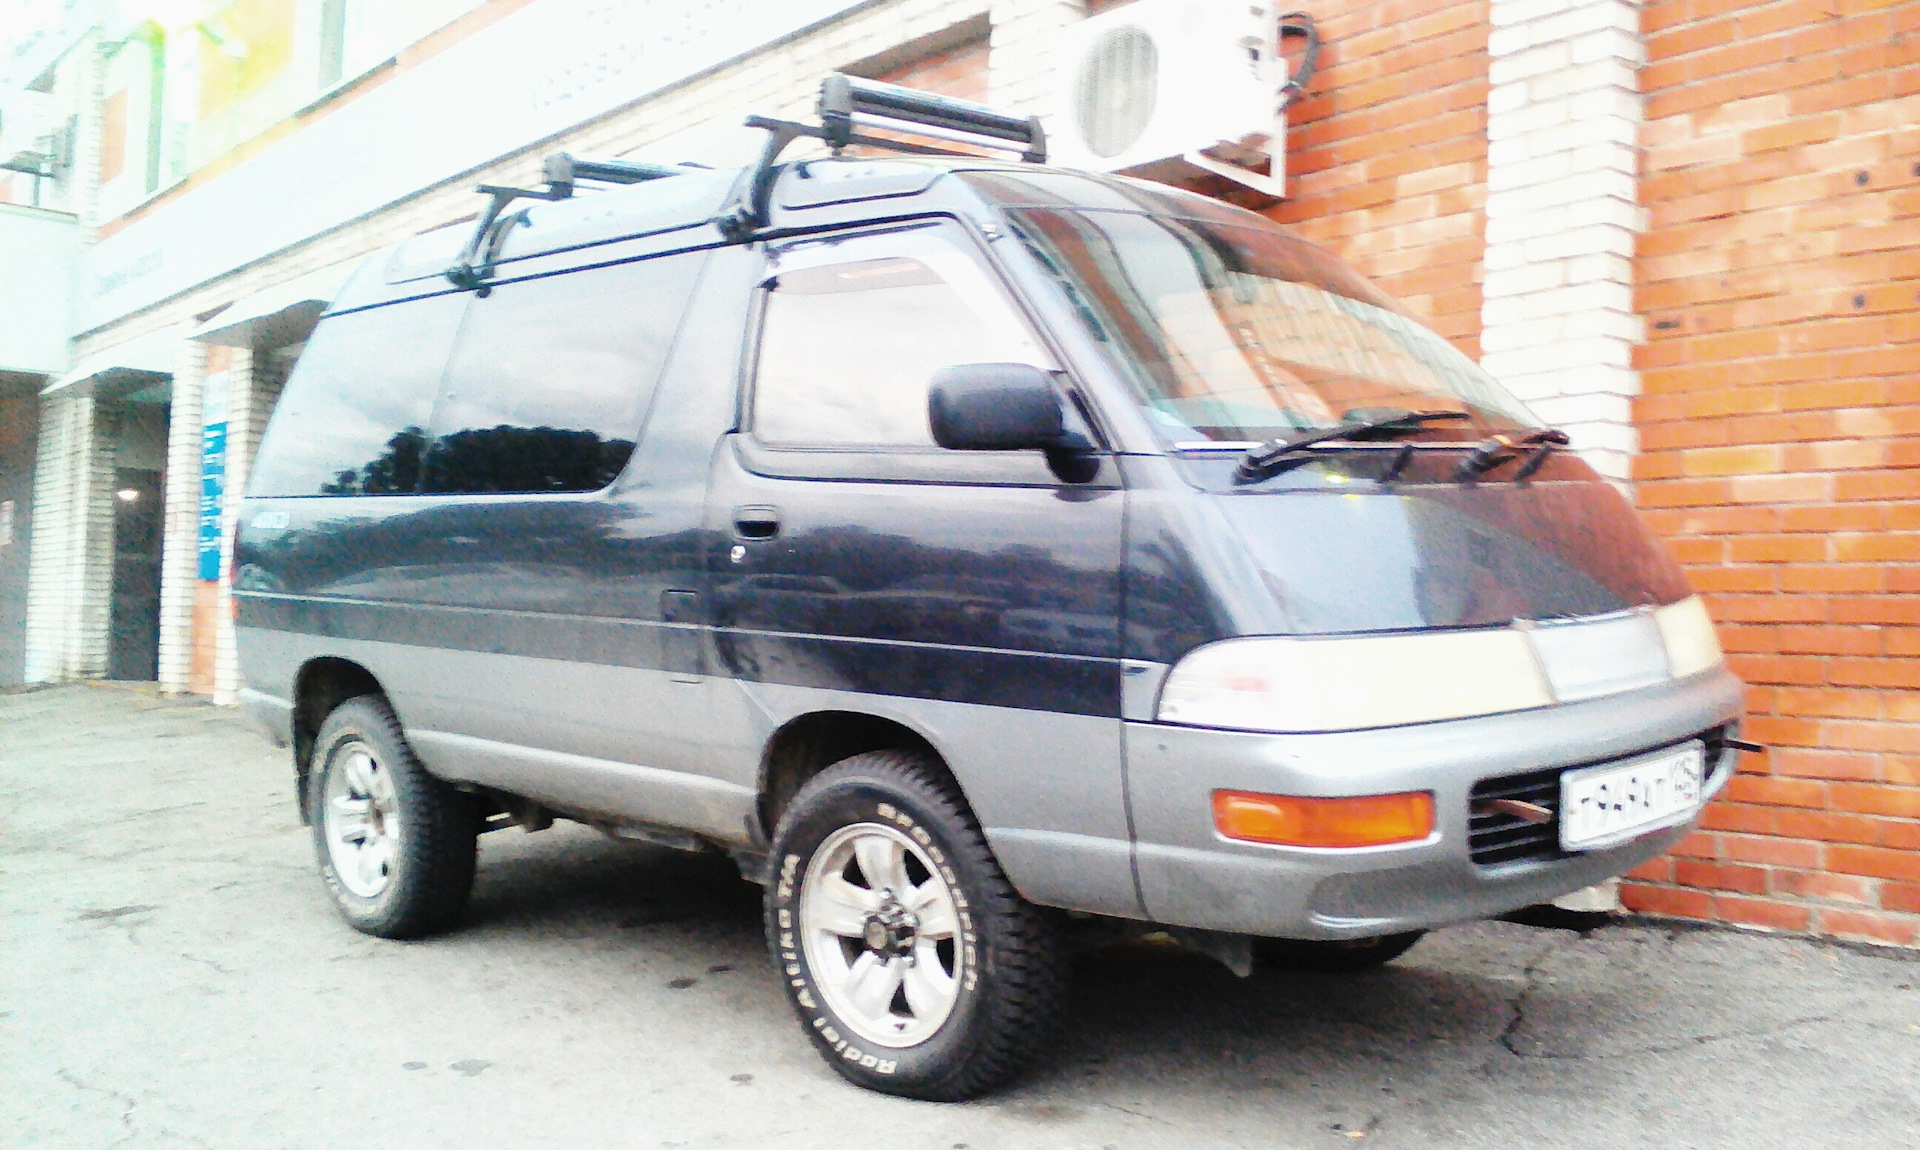 Town цена. Тойота Таун айс 1996. Toyota Town Ace 1996 Tuning. Лифт Toyota Town Ace, 1990. Toyota Town Ace 2.